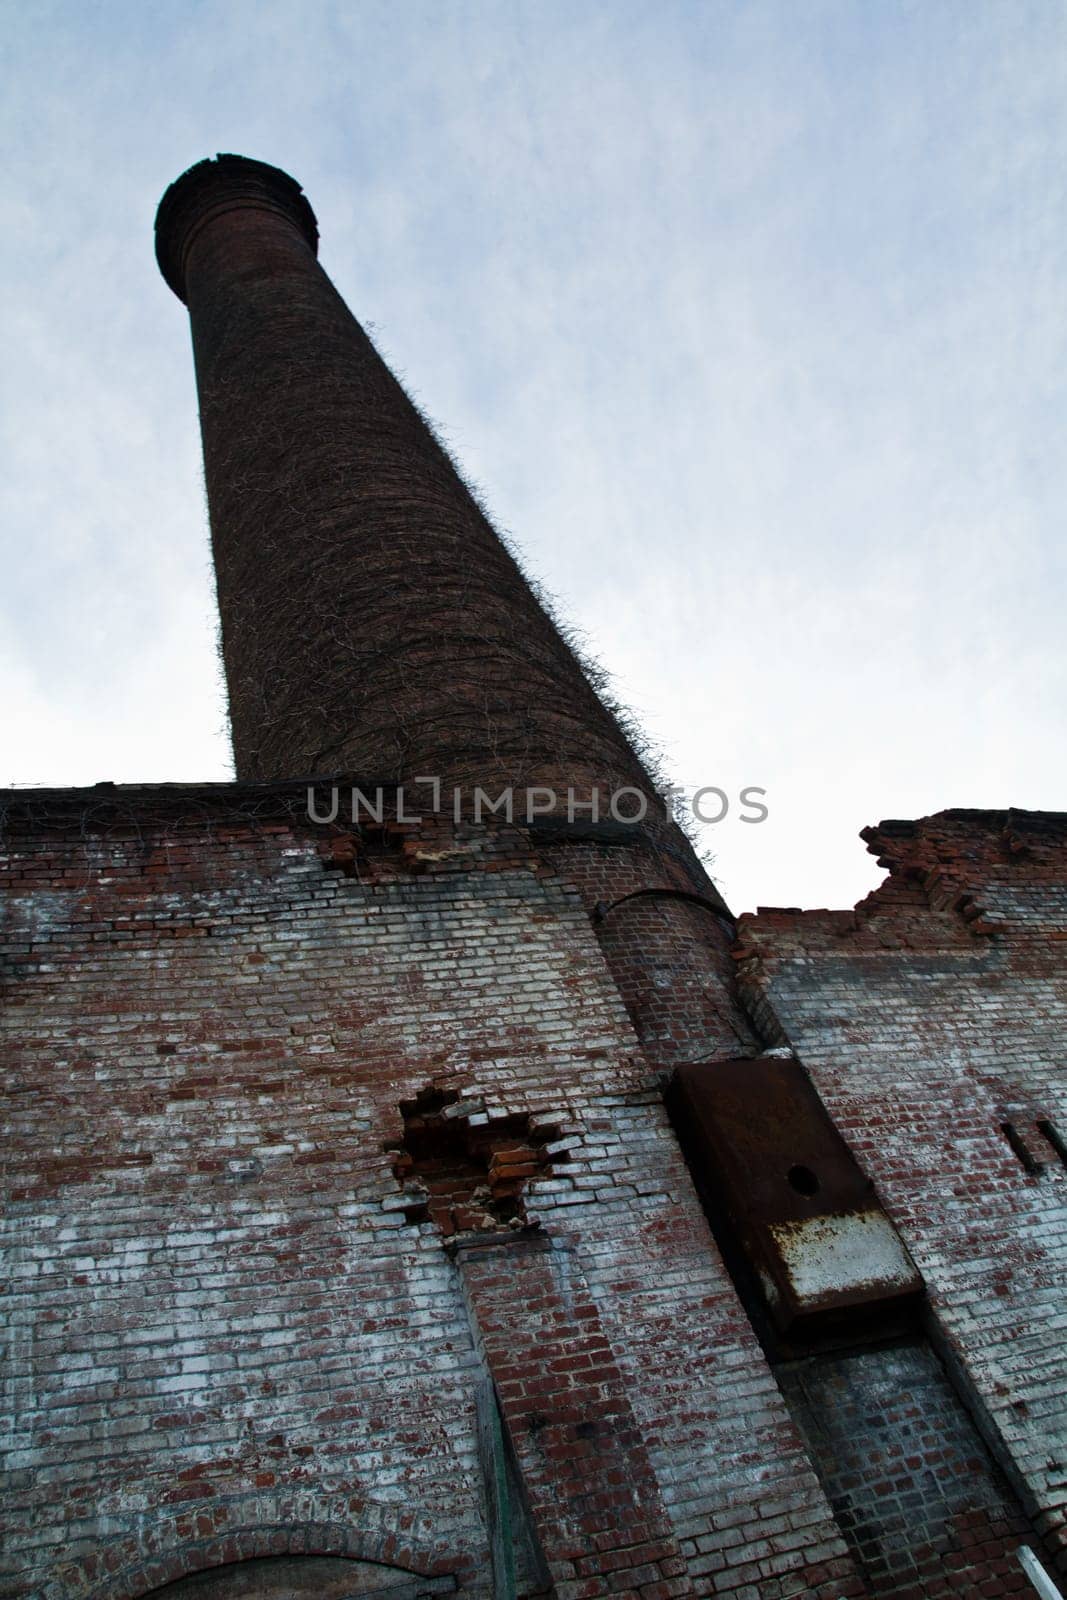 Abandoned Industrial Brick Chimney Overgrown with Vines in Louisville by njproductions